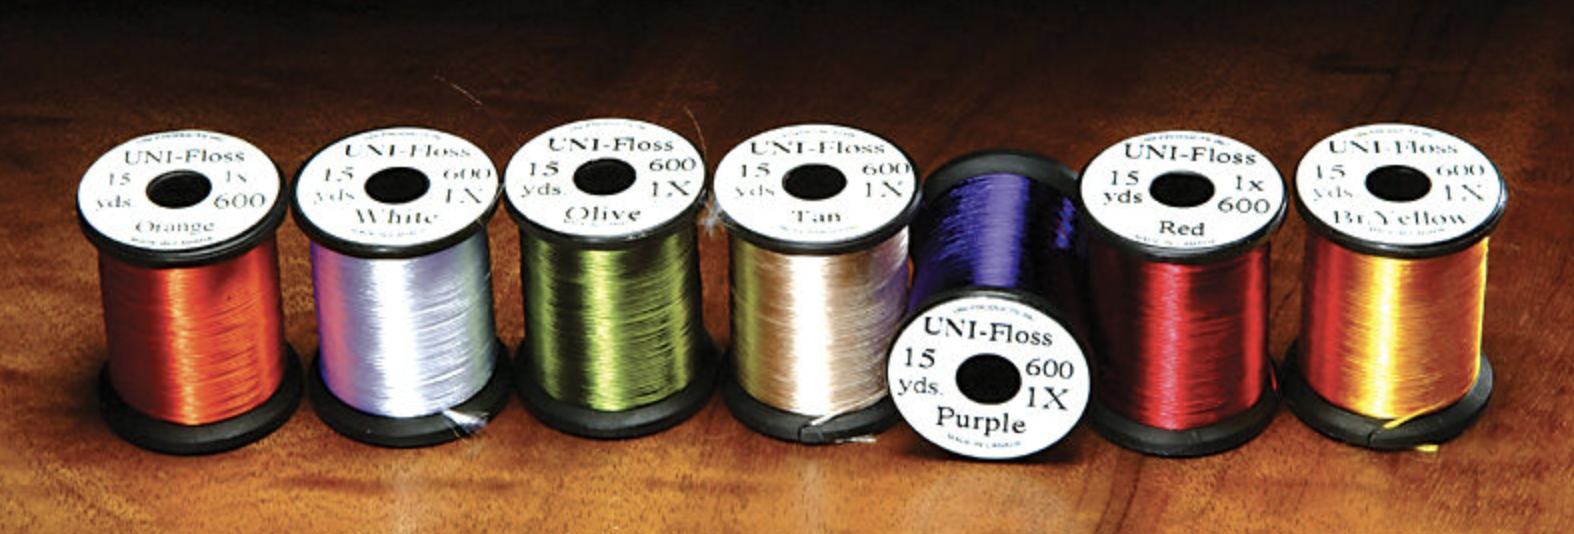 Uni-Floss is known for its durability, flexibility, and vibrant colors, making it a popular choice for creating bodies, ribbing,